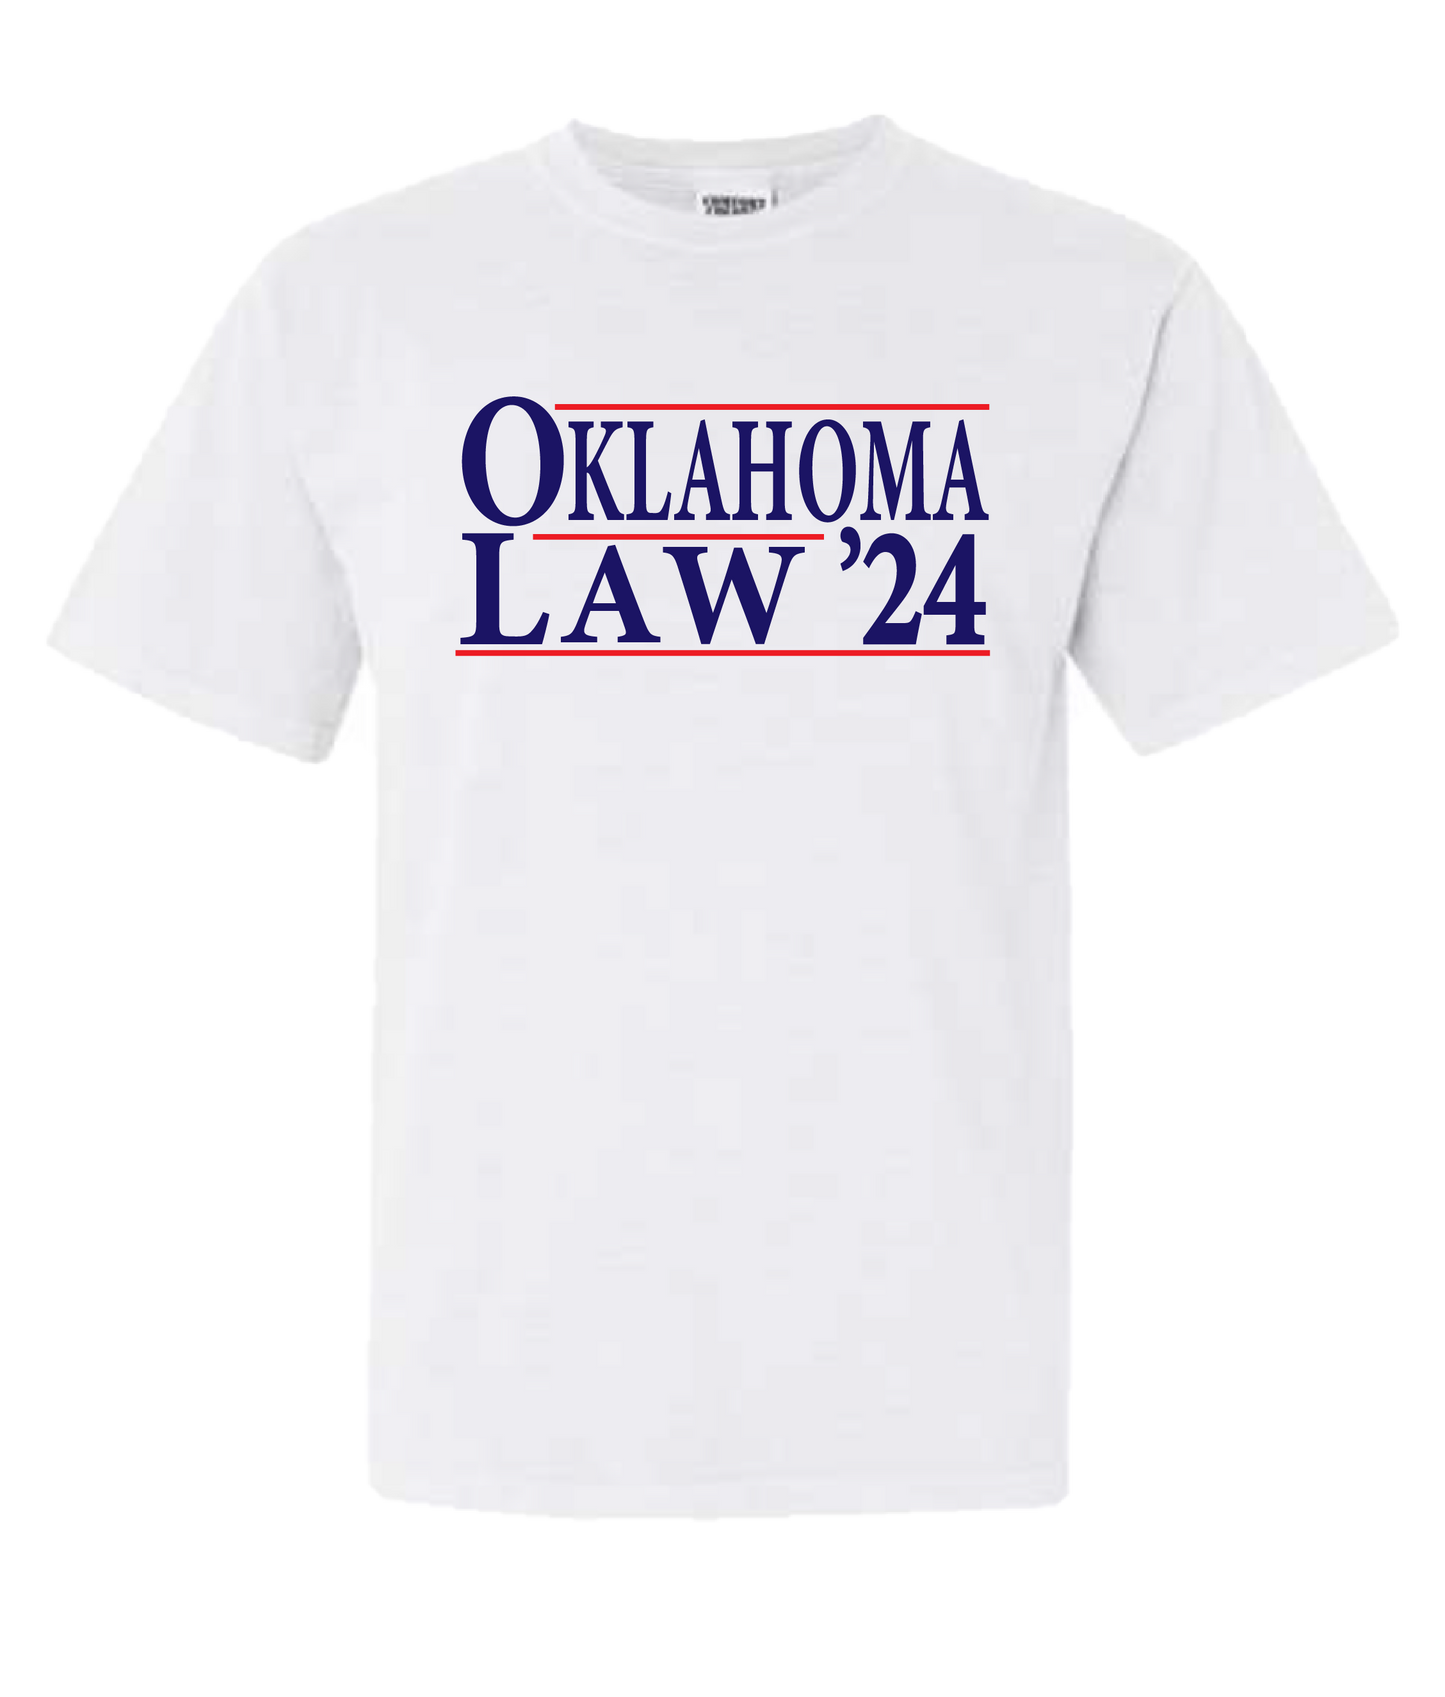 Oklahoma Law '24 campaign style (can customize year) t-shirt